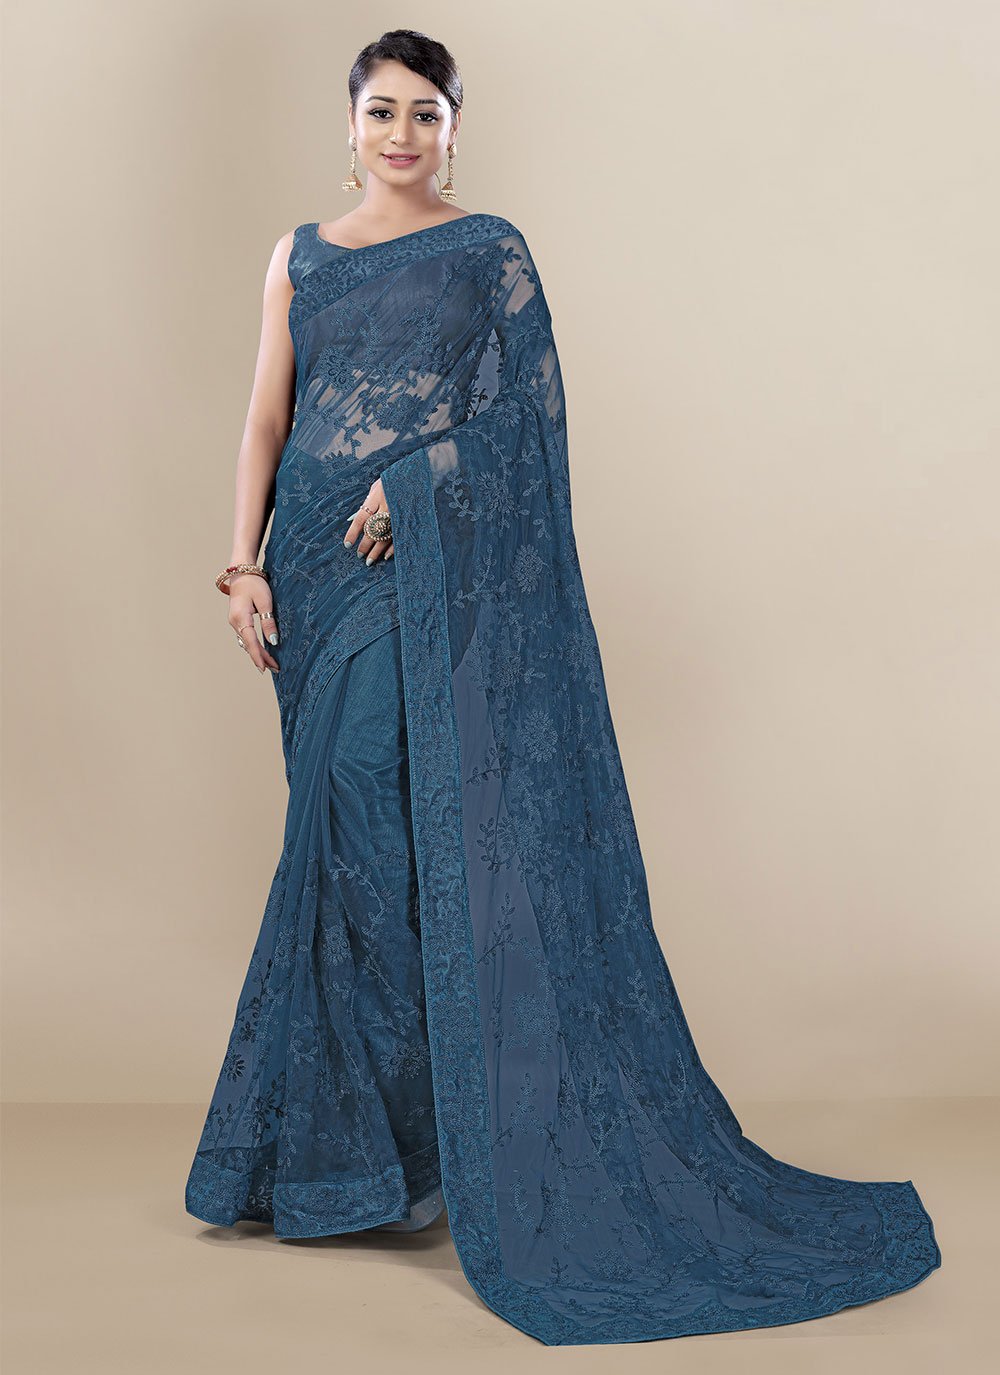 Teal color Embroidered Net Contemporary Saree